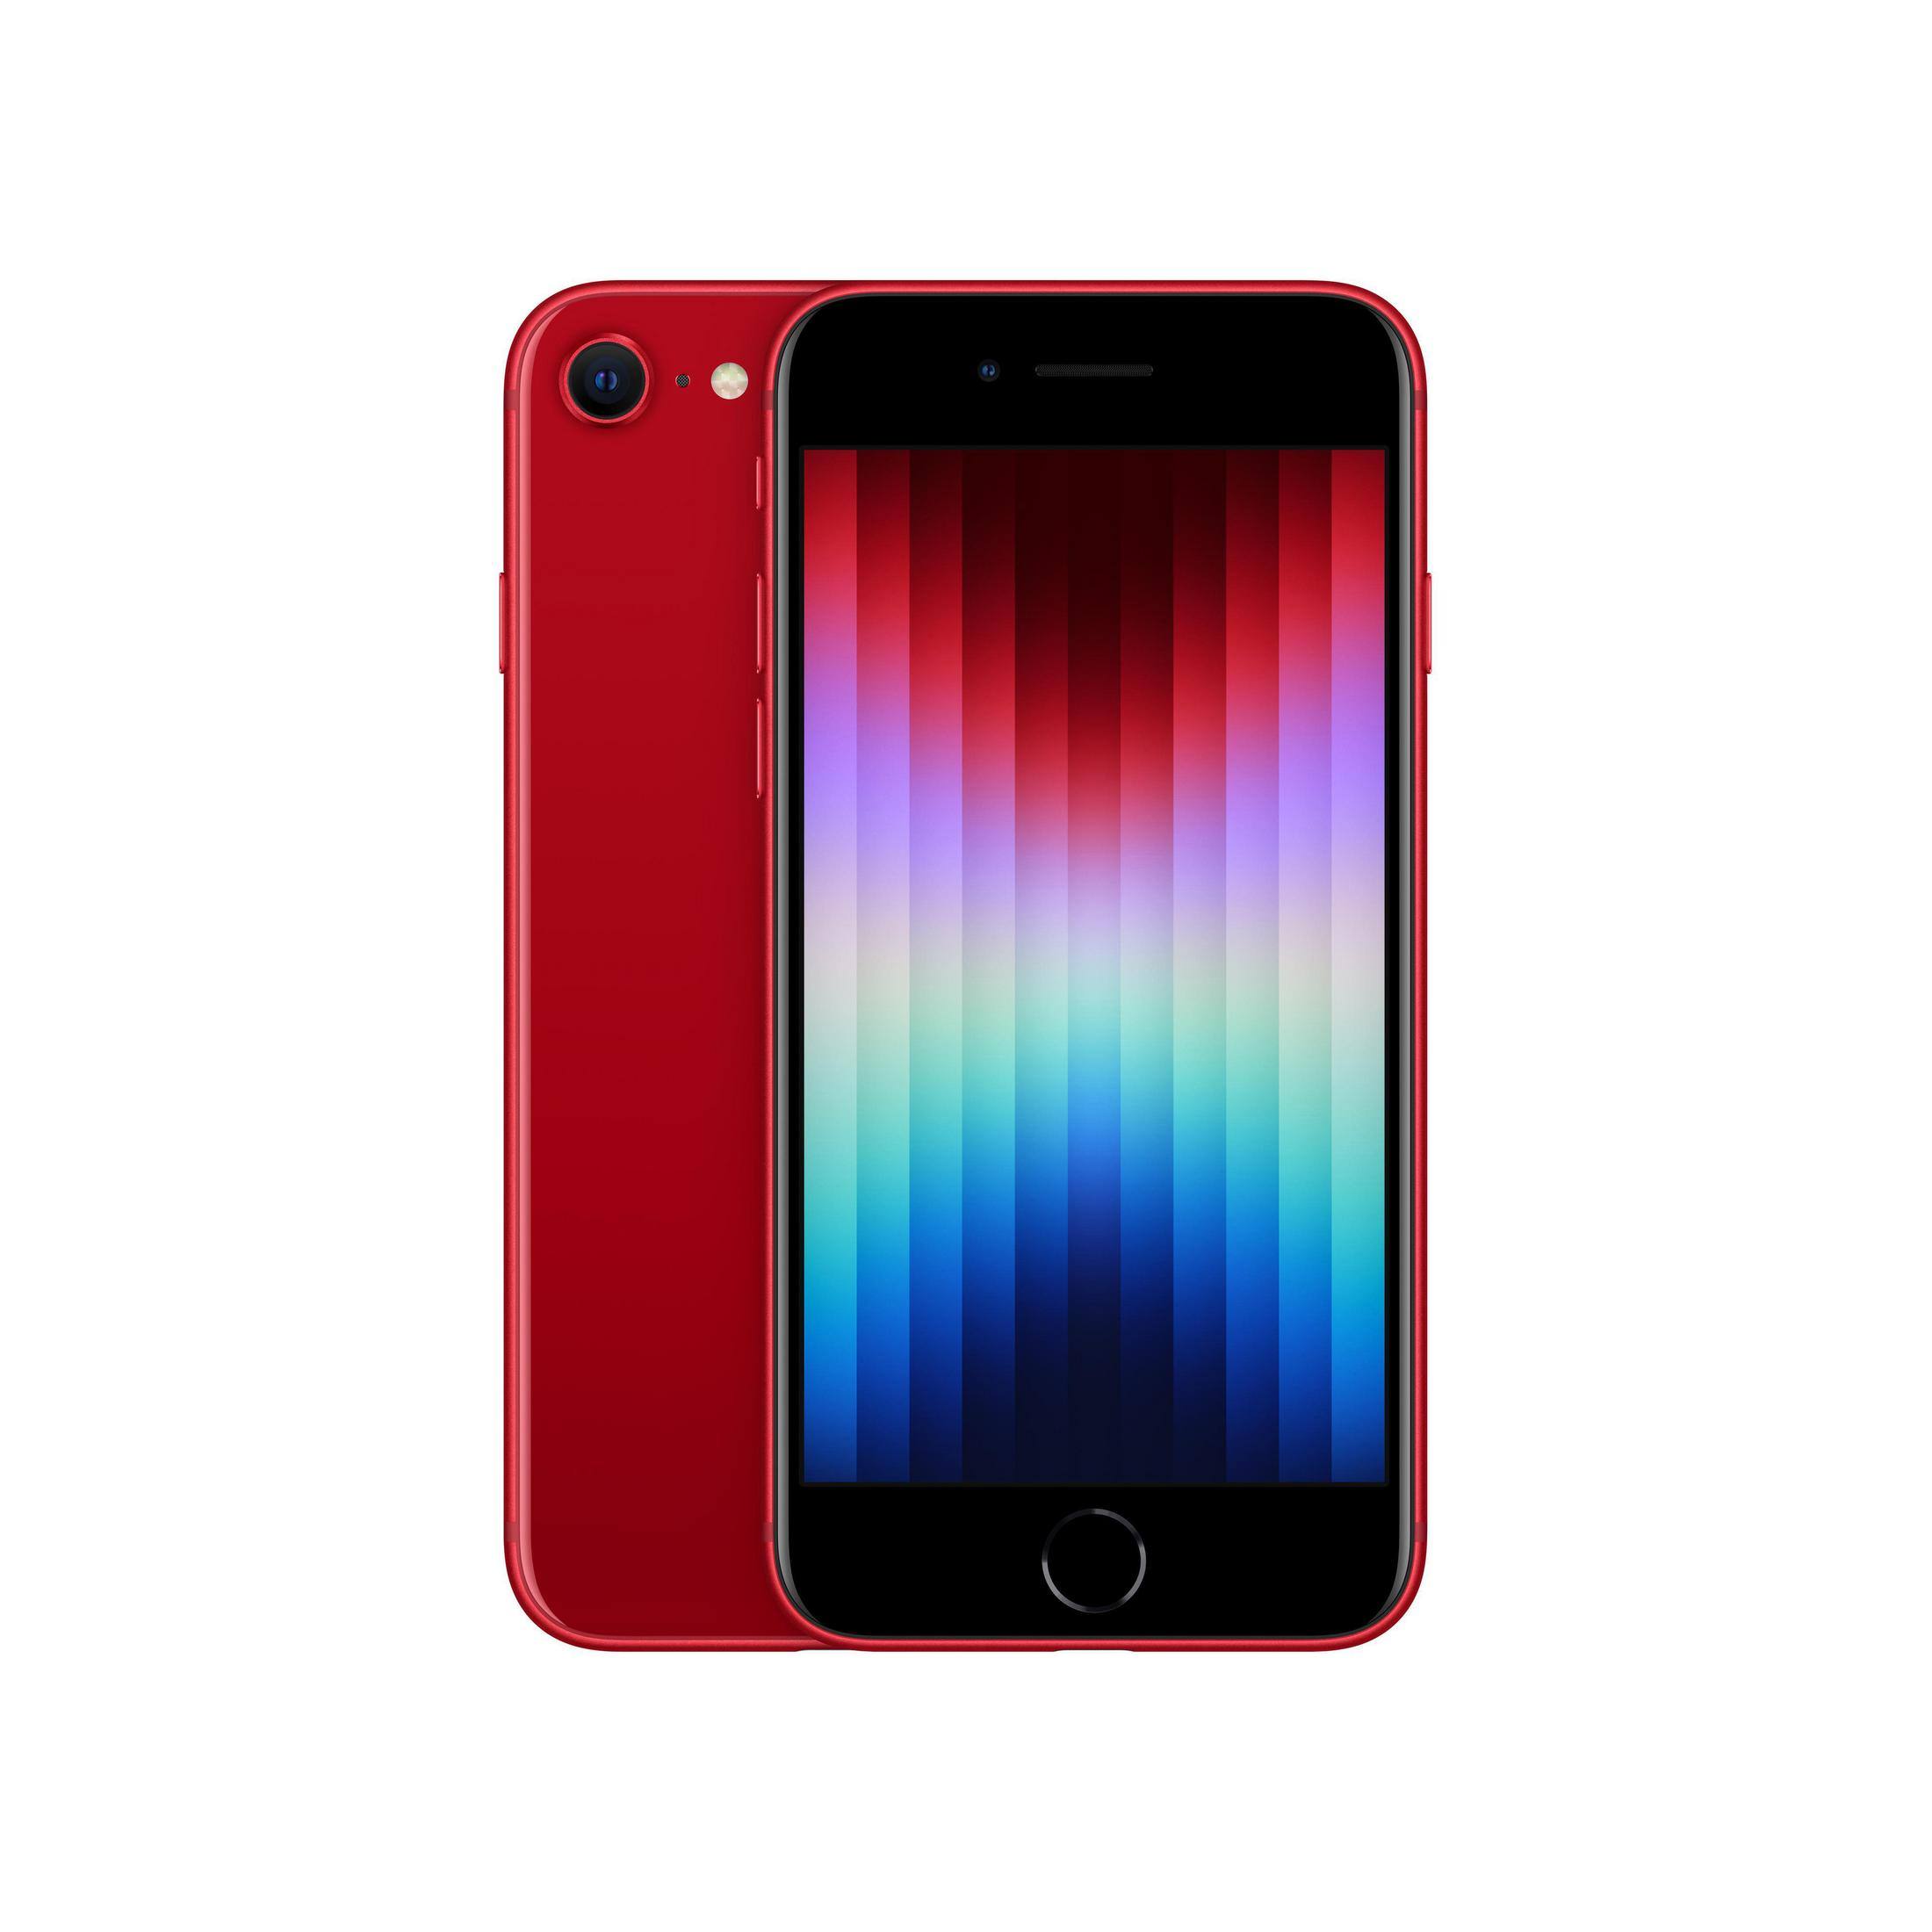 APPLE IPHONE SE 256GB (Product) (PRODUCT) 256 RED Red GB